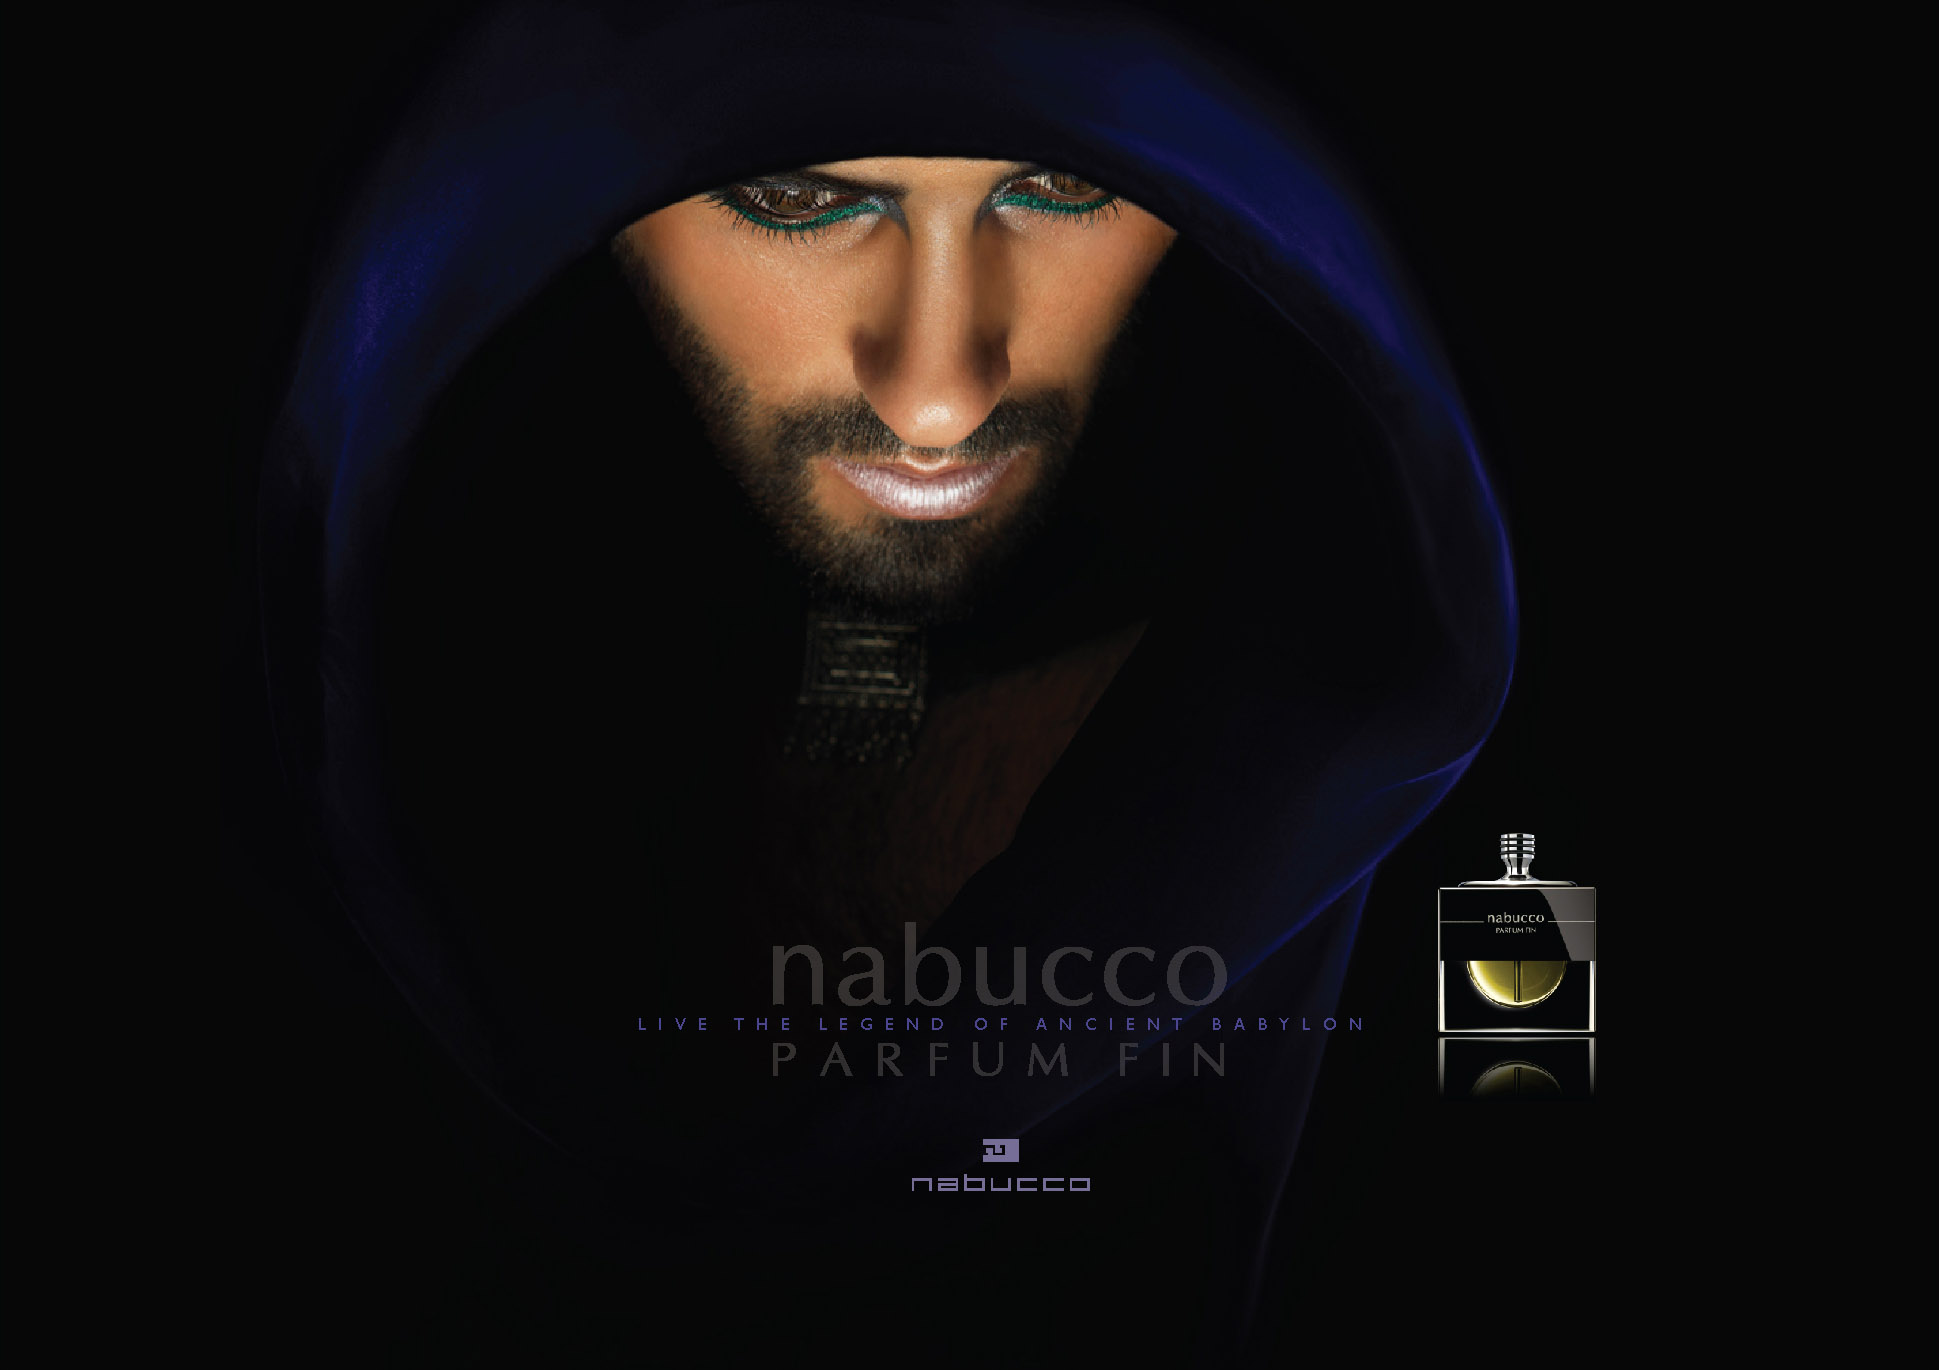 Poster for Nabucco pour homme from Nabucco Parfums